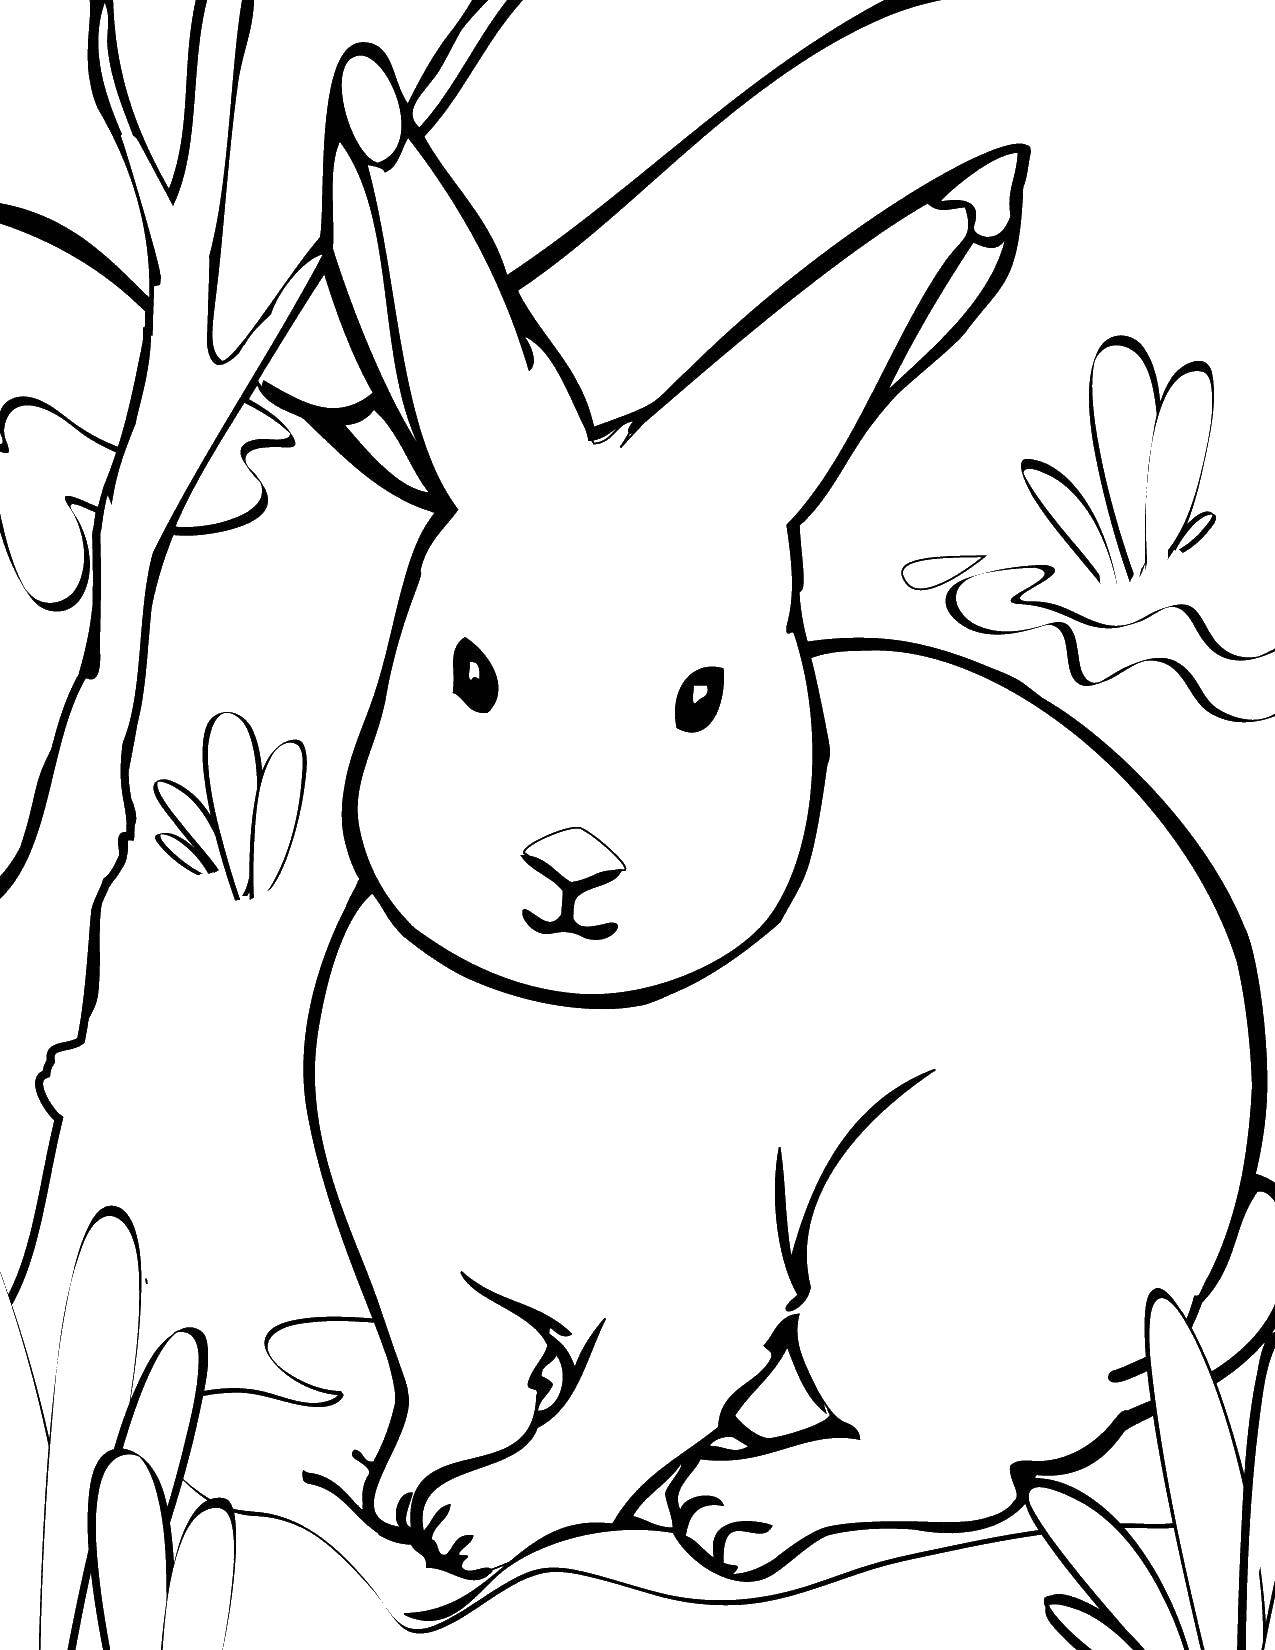 Coloring A rabbit in the woods. Category animals. Tags:  animals, forest, rabbit.